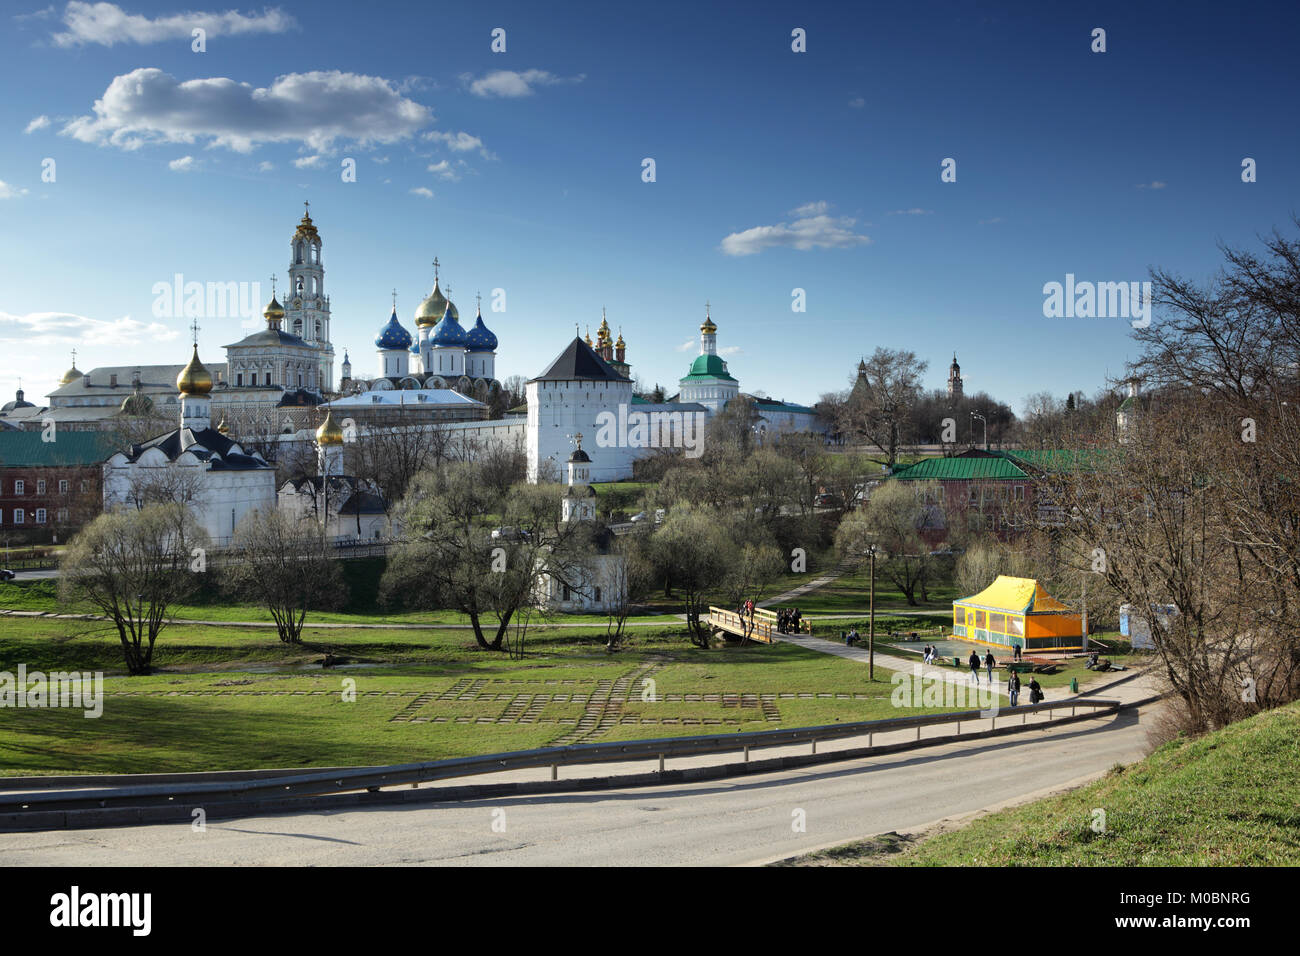 Sergiyev Posad, Russia - April 29, 2011: View to Trinity Lavra of St. Sergius in a springtime day. Since 1993, the Lavra is listed as UNESCO World Her Stock Photo